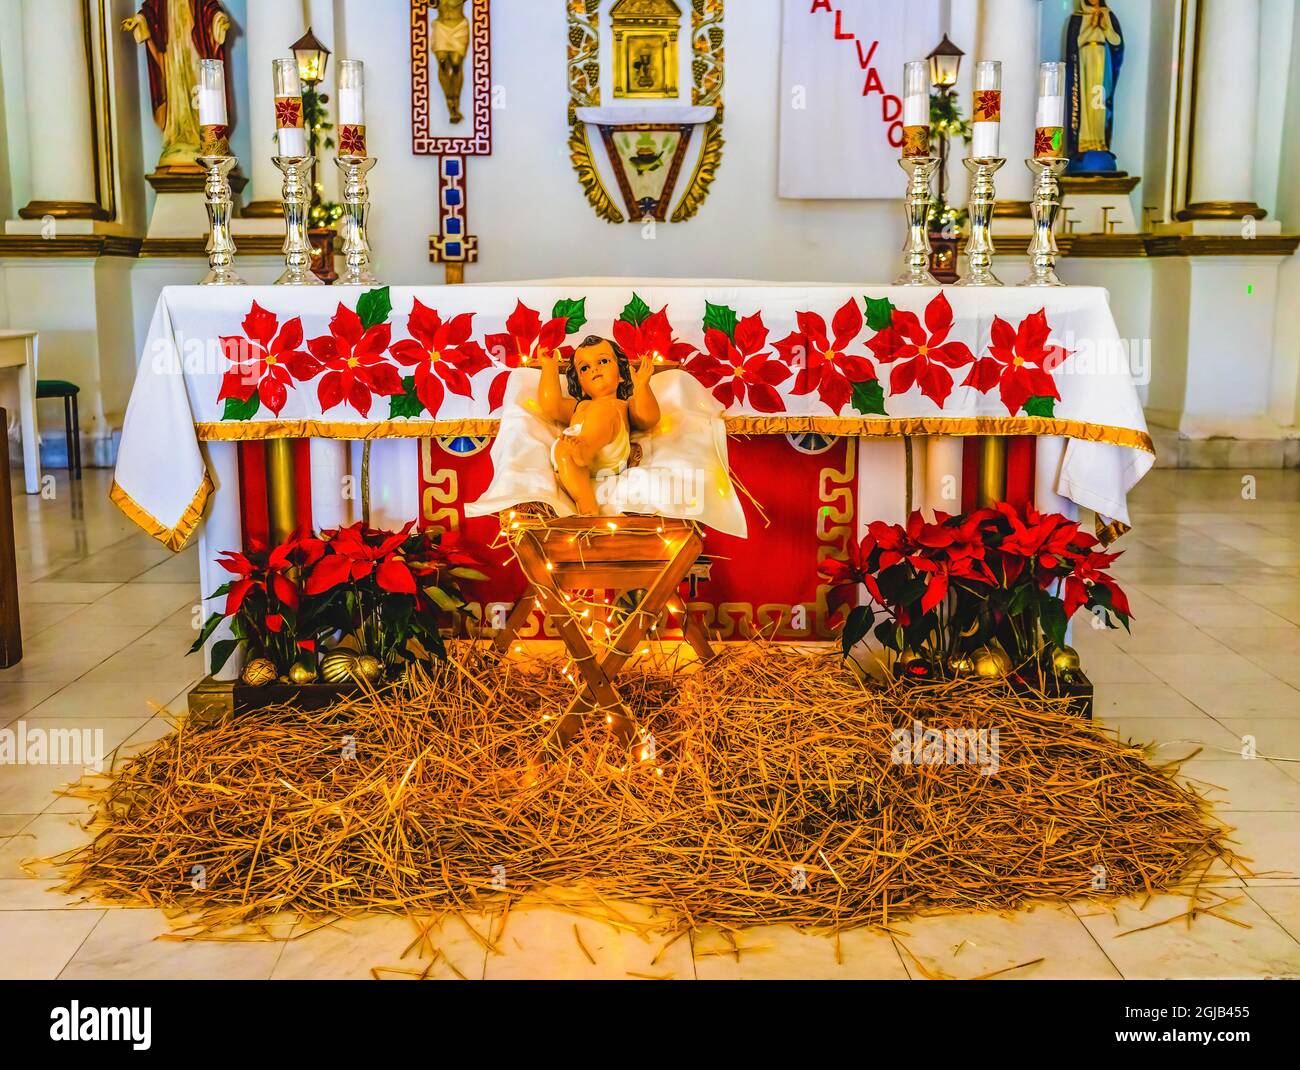 Basilica altar Christmas Creche Nativity, Mission San Jose del Cabo, Mexico. Spanish words above altar 'A savior has been born to us'. Mission founded Stock Photo